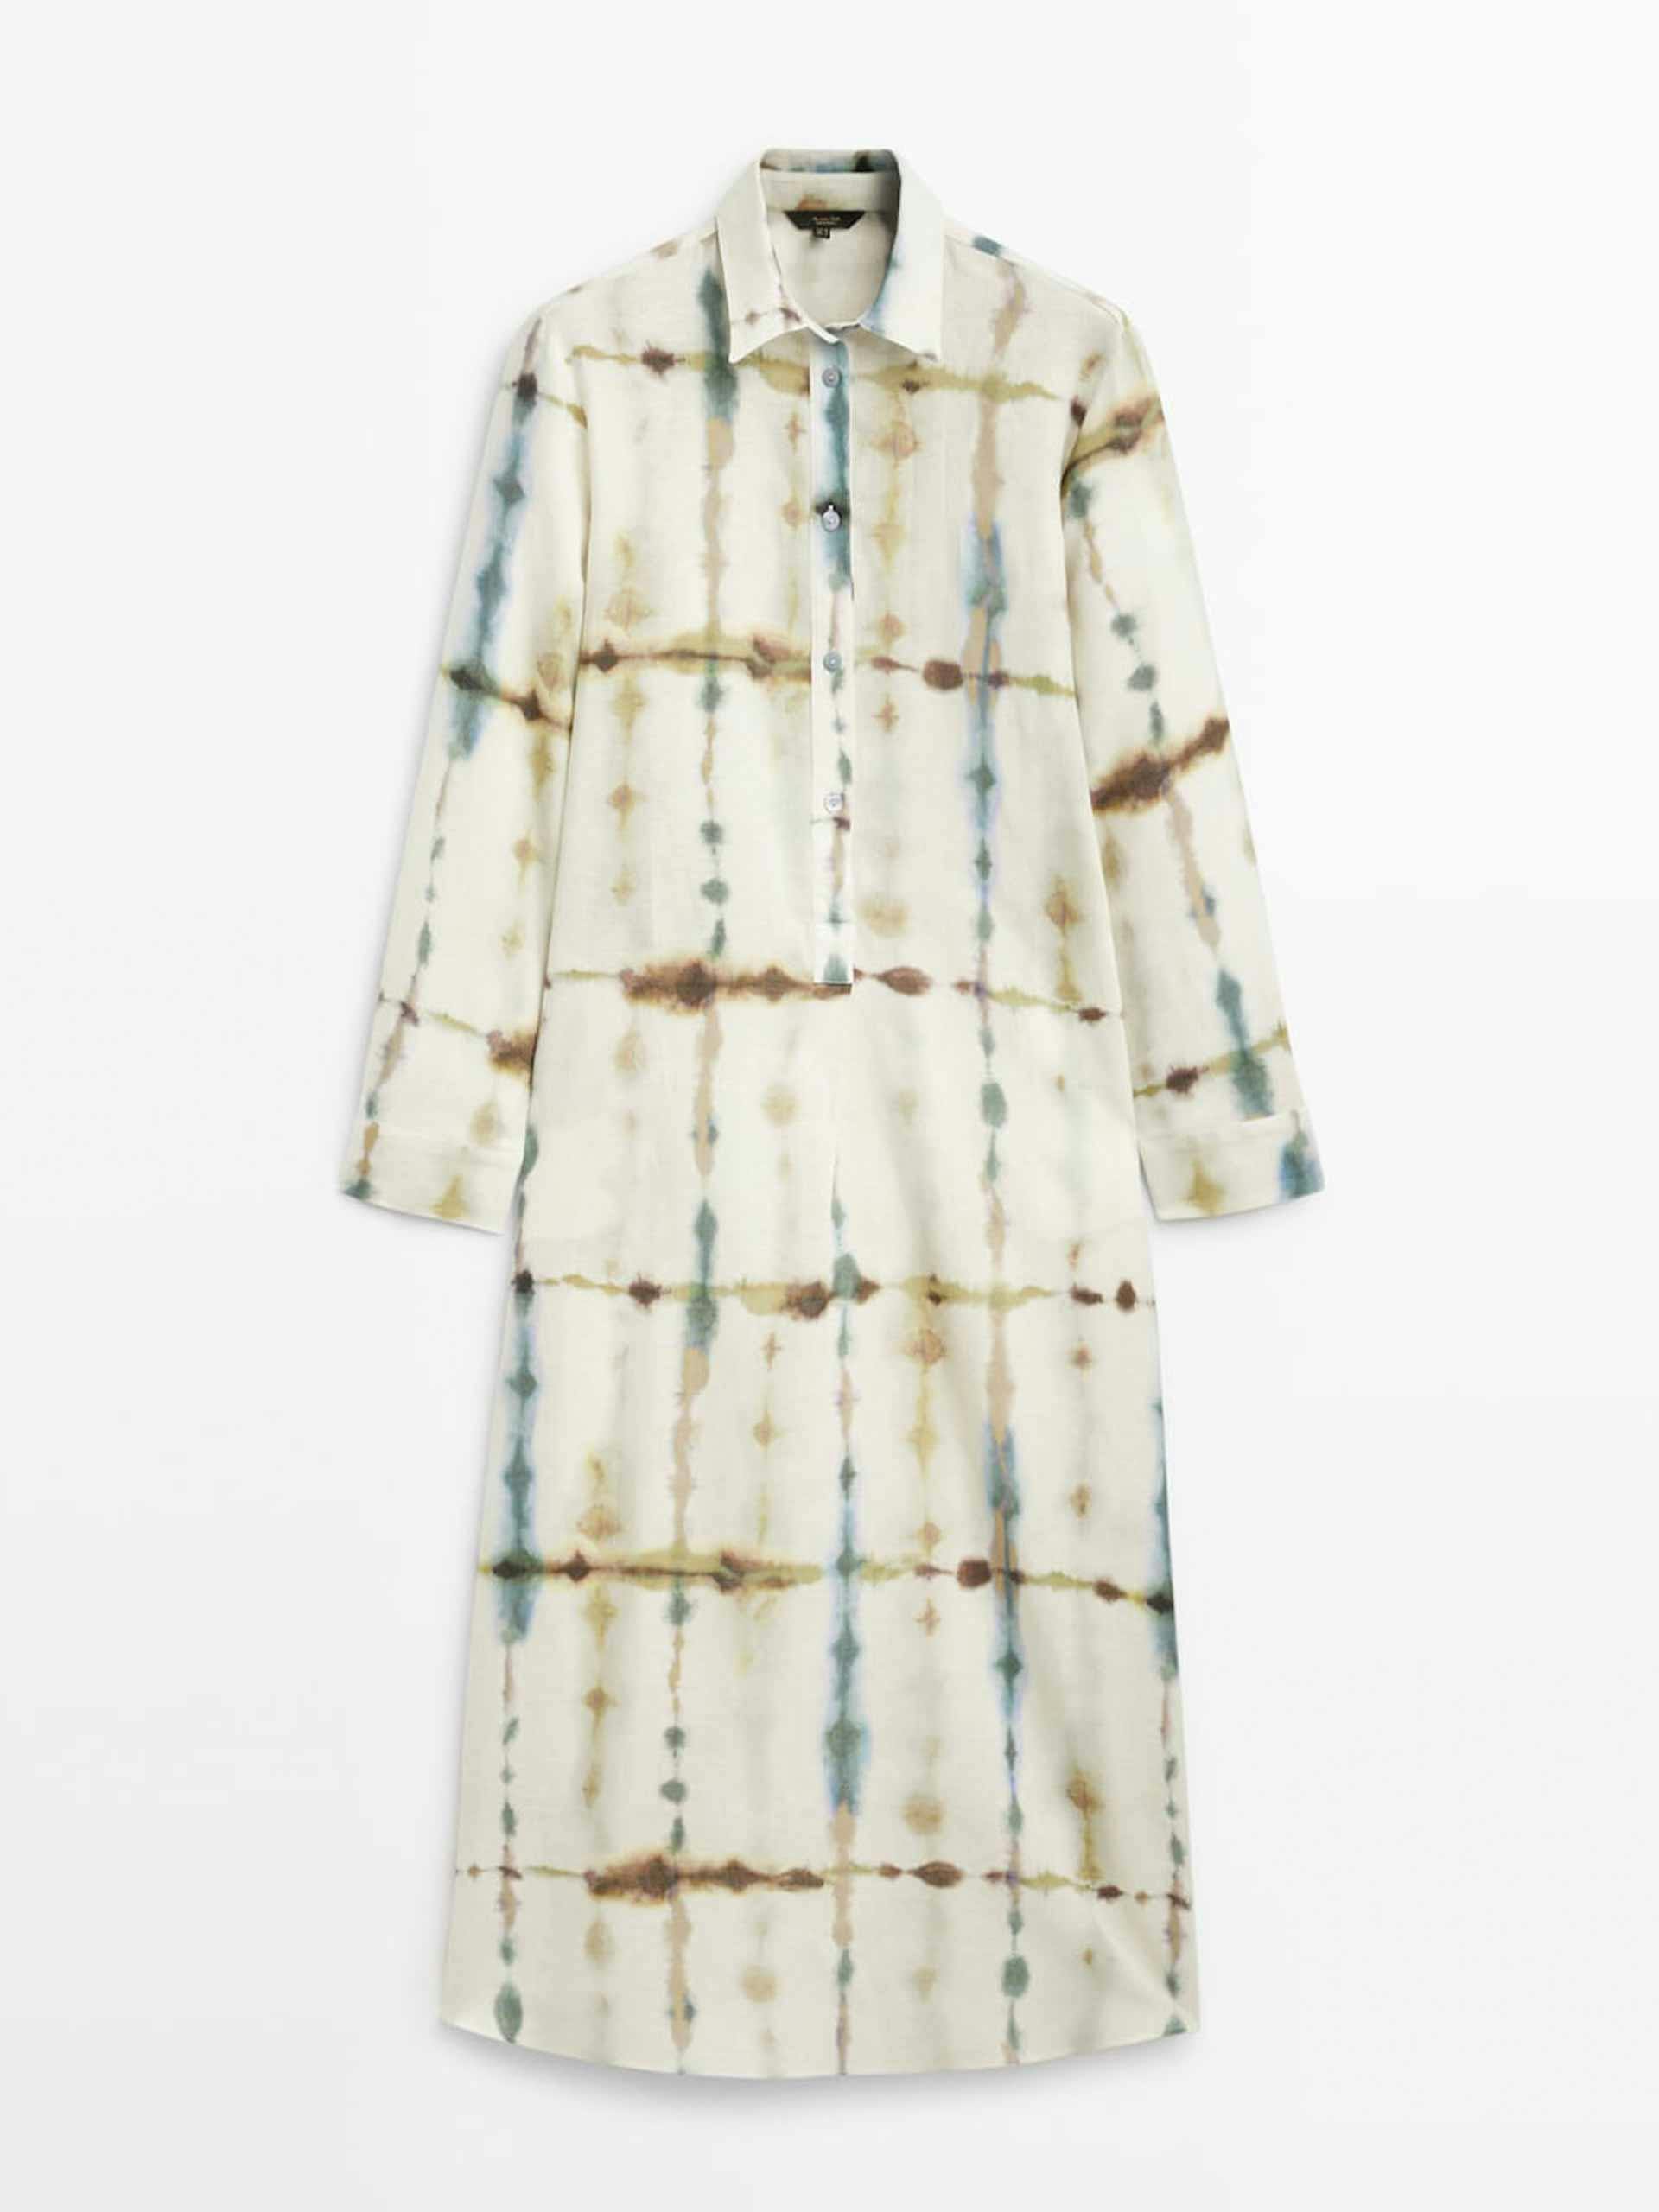 Tie-dyed linen and cotton blend dress